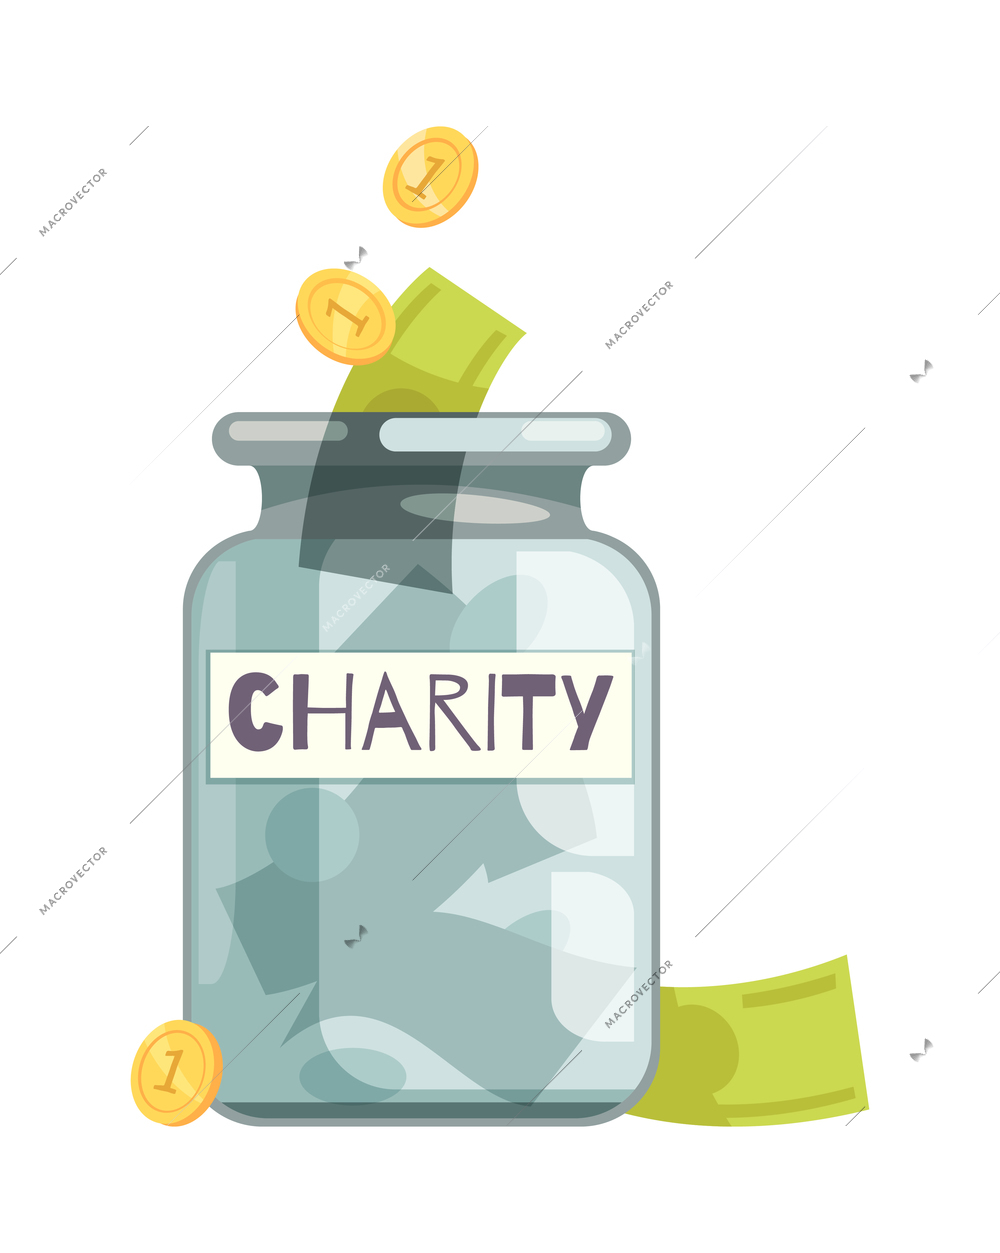 Charity composition with isolated concept images of money and goods donation on blank background vector illustration